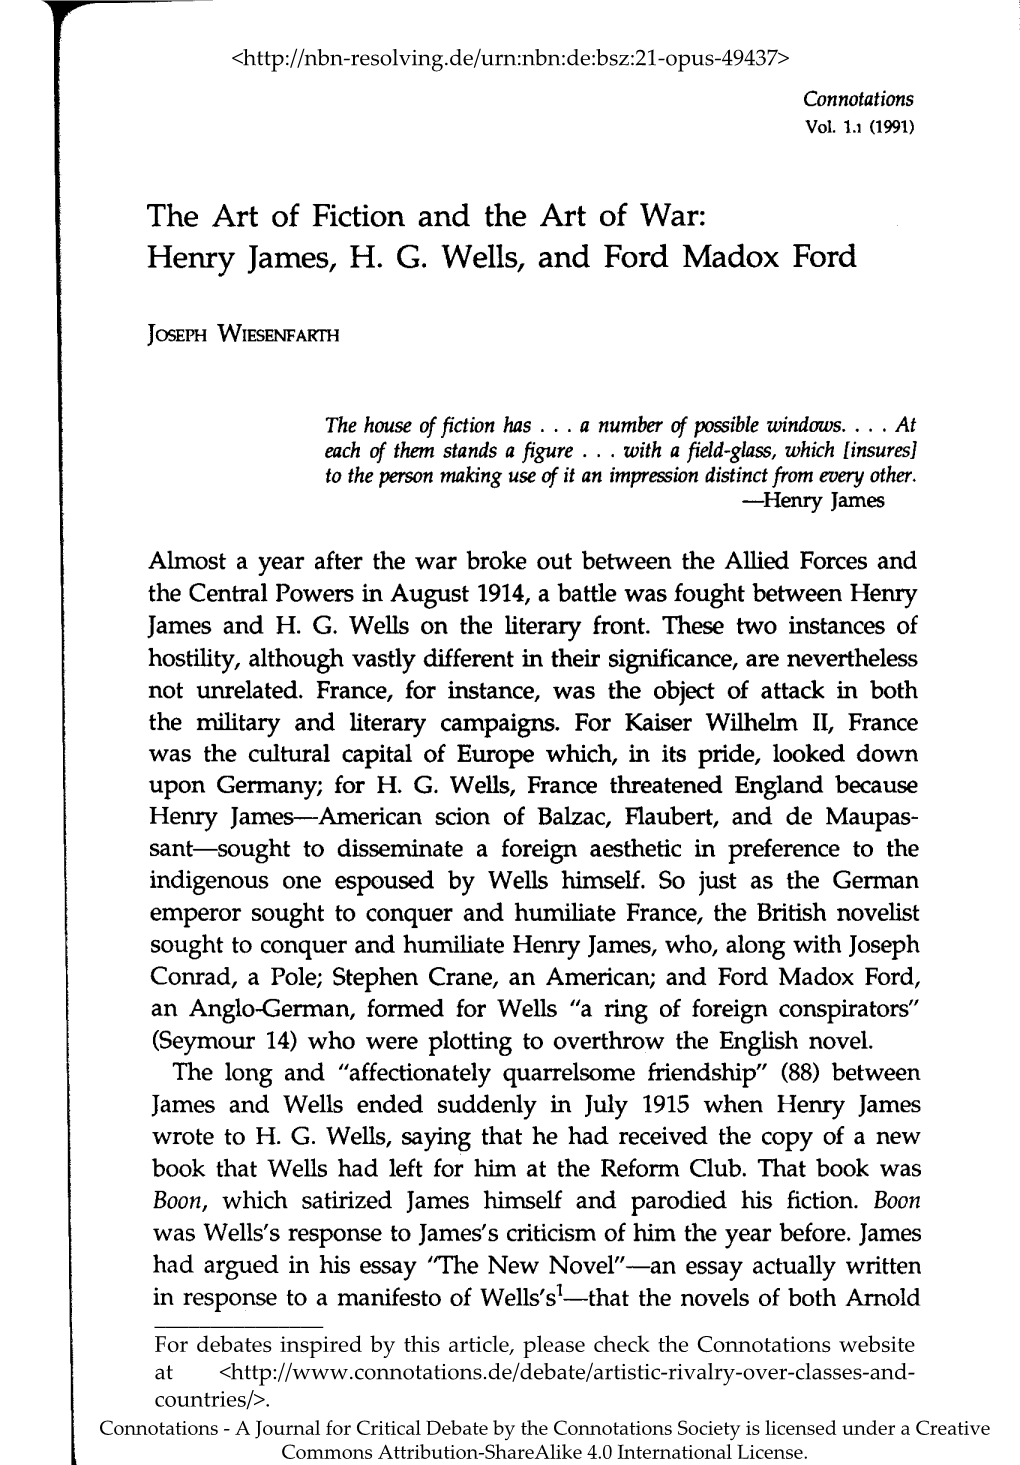 Henry James, HG Wells, and Ford Madox Ford